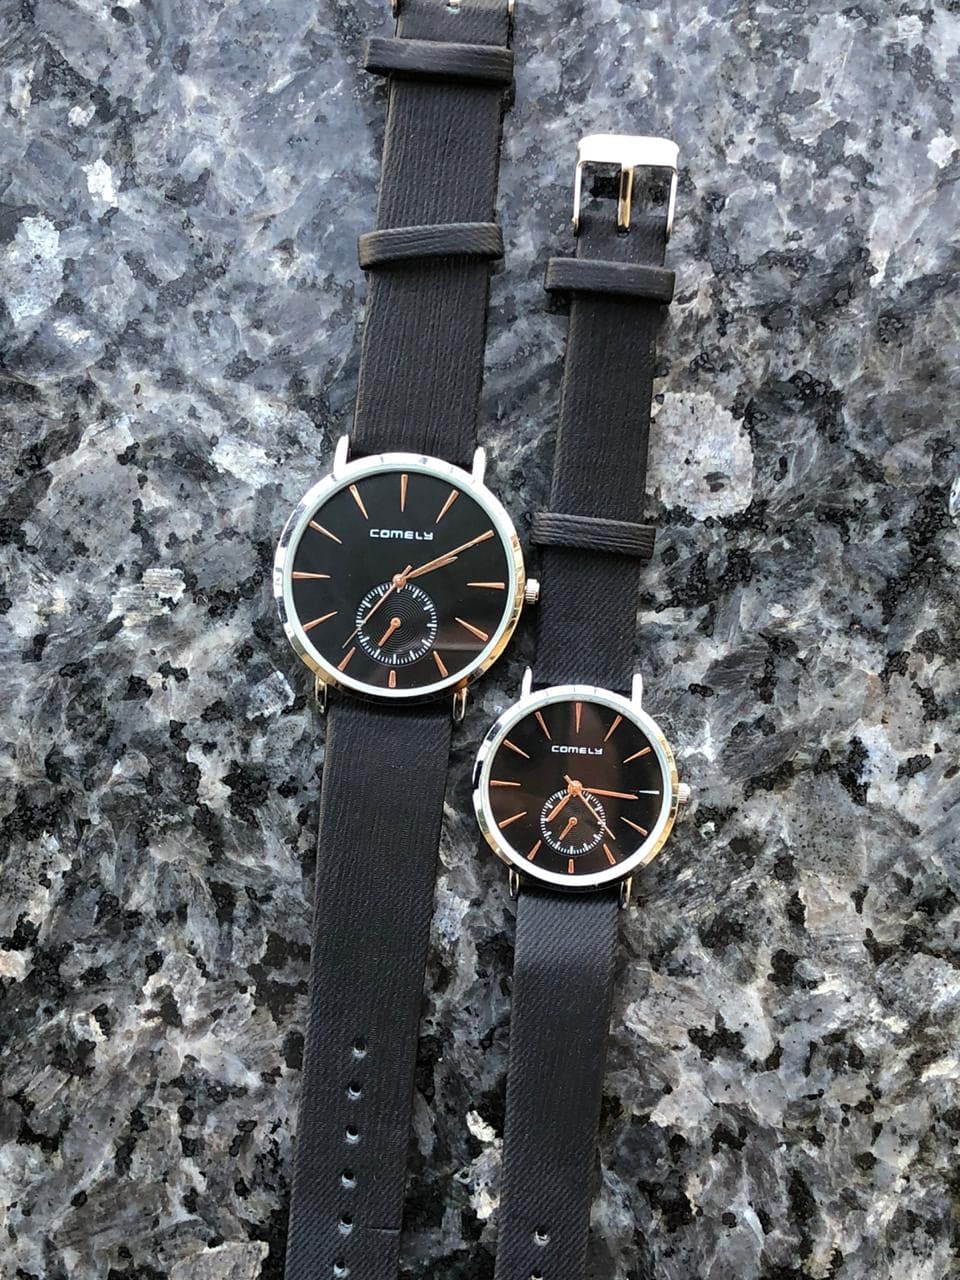 Couple Pair Quartz Watches, His and Hers Couple Wristwatches, Quartz Analog Wrist Watches for Both Men and Women